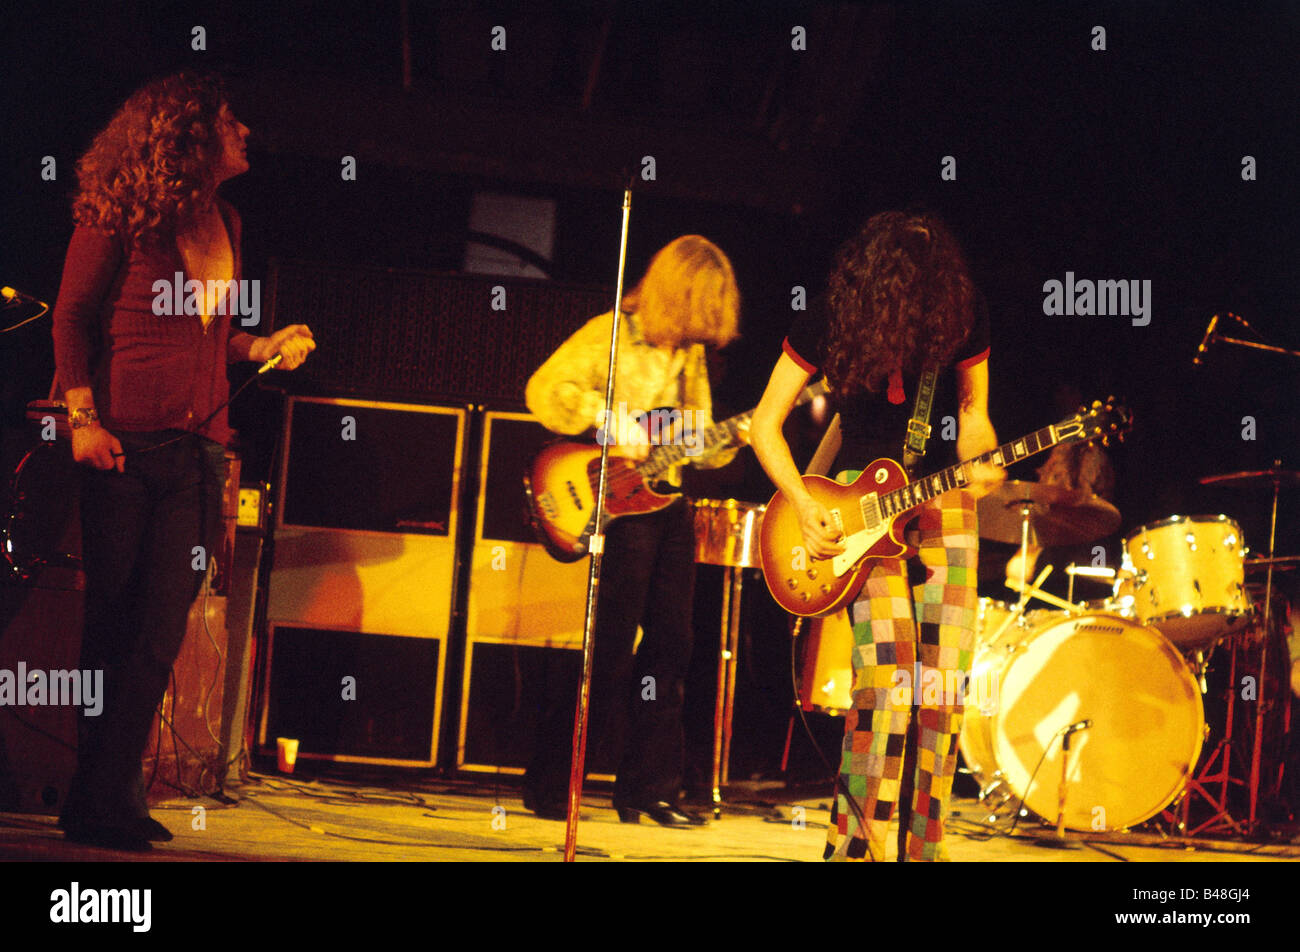 Led Zeppelin High Resolution Stock Photography and Images - Alamy